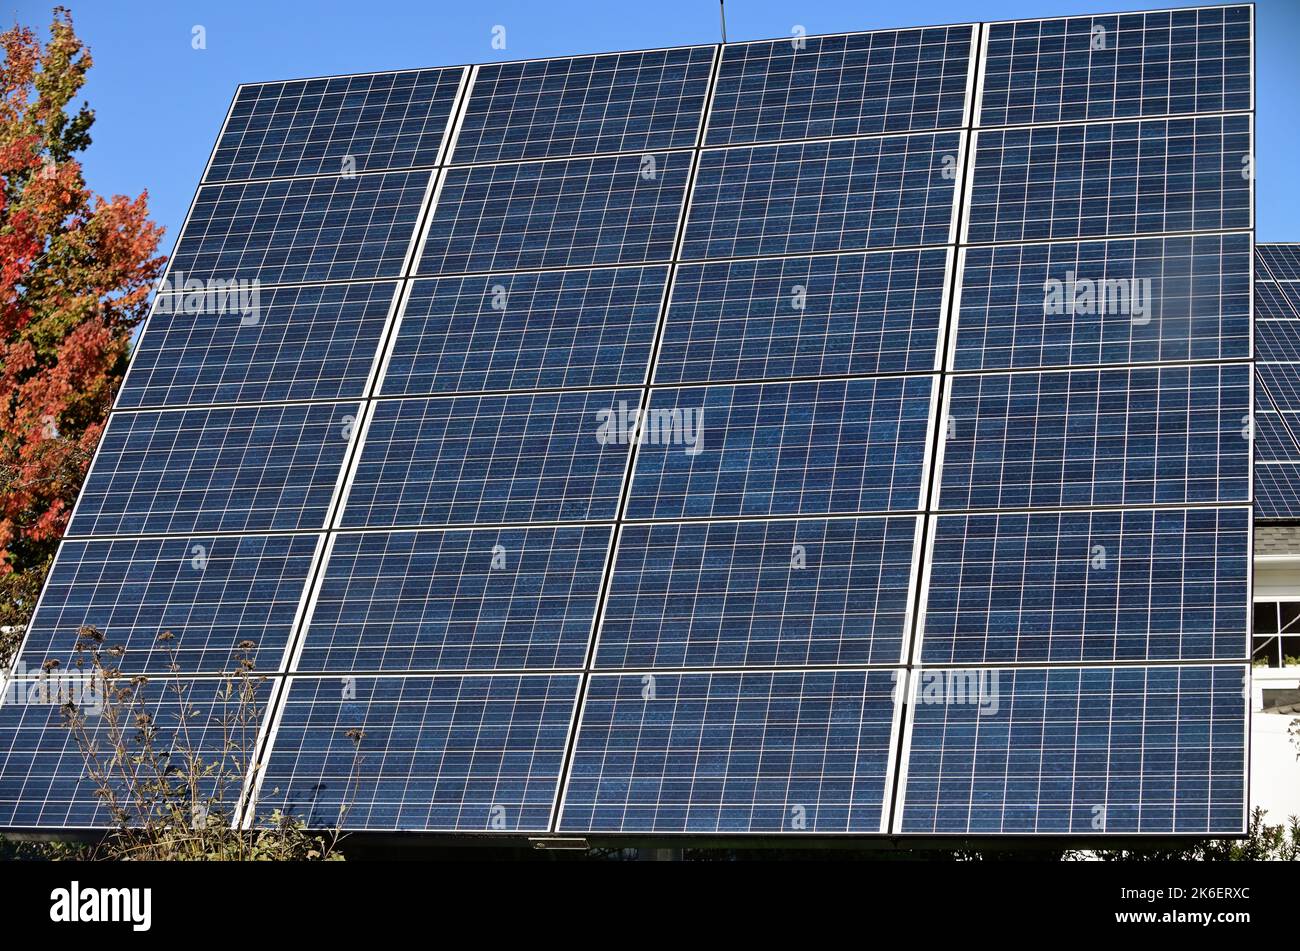 Freeport, Maine, USA. Solar panels in use to collect an energy source for local businesses. Stock Photo